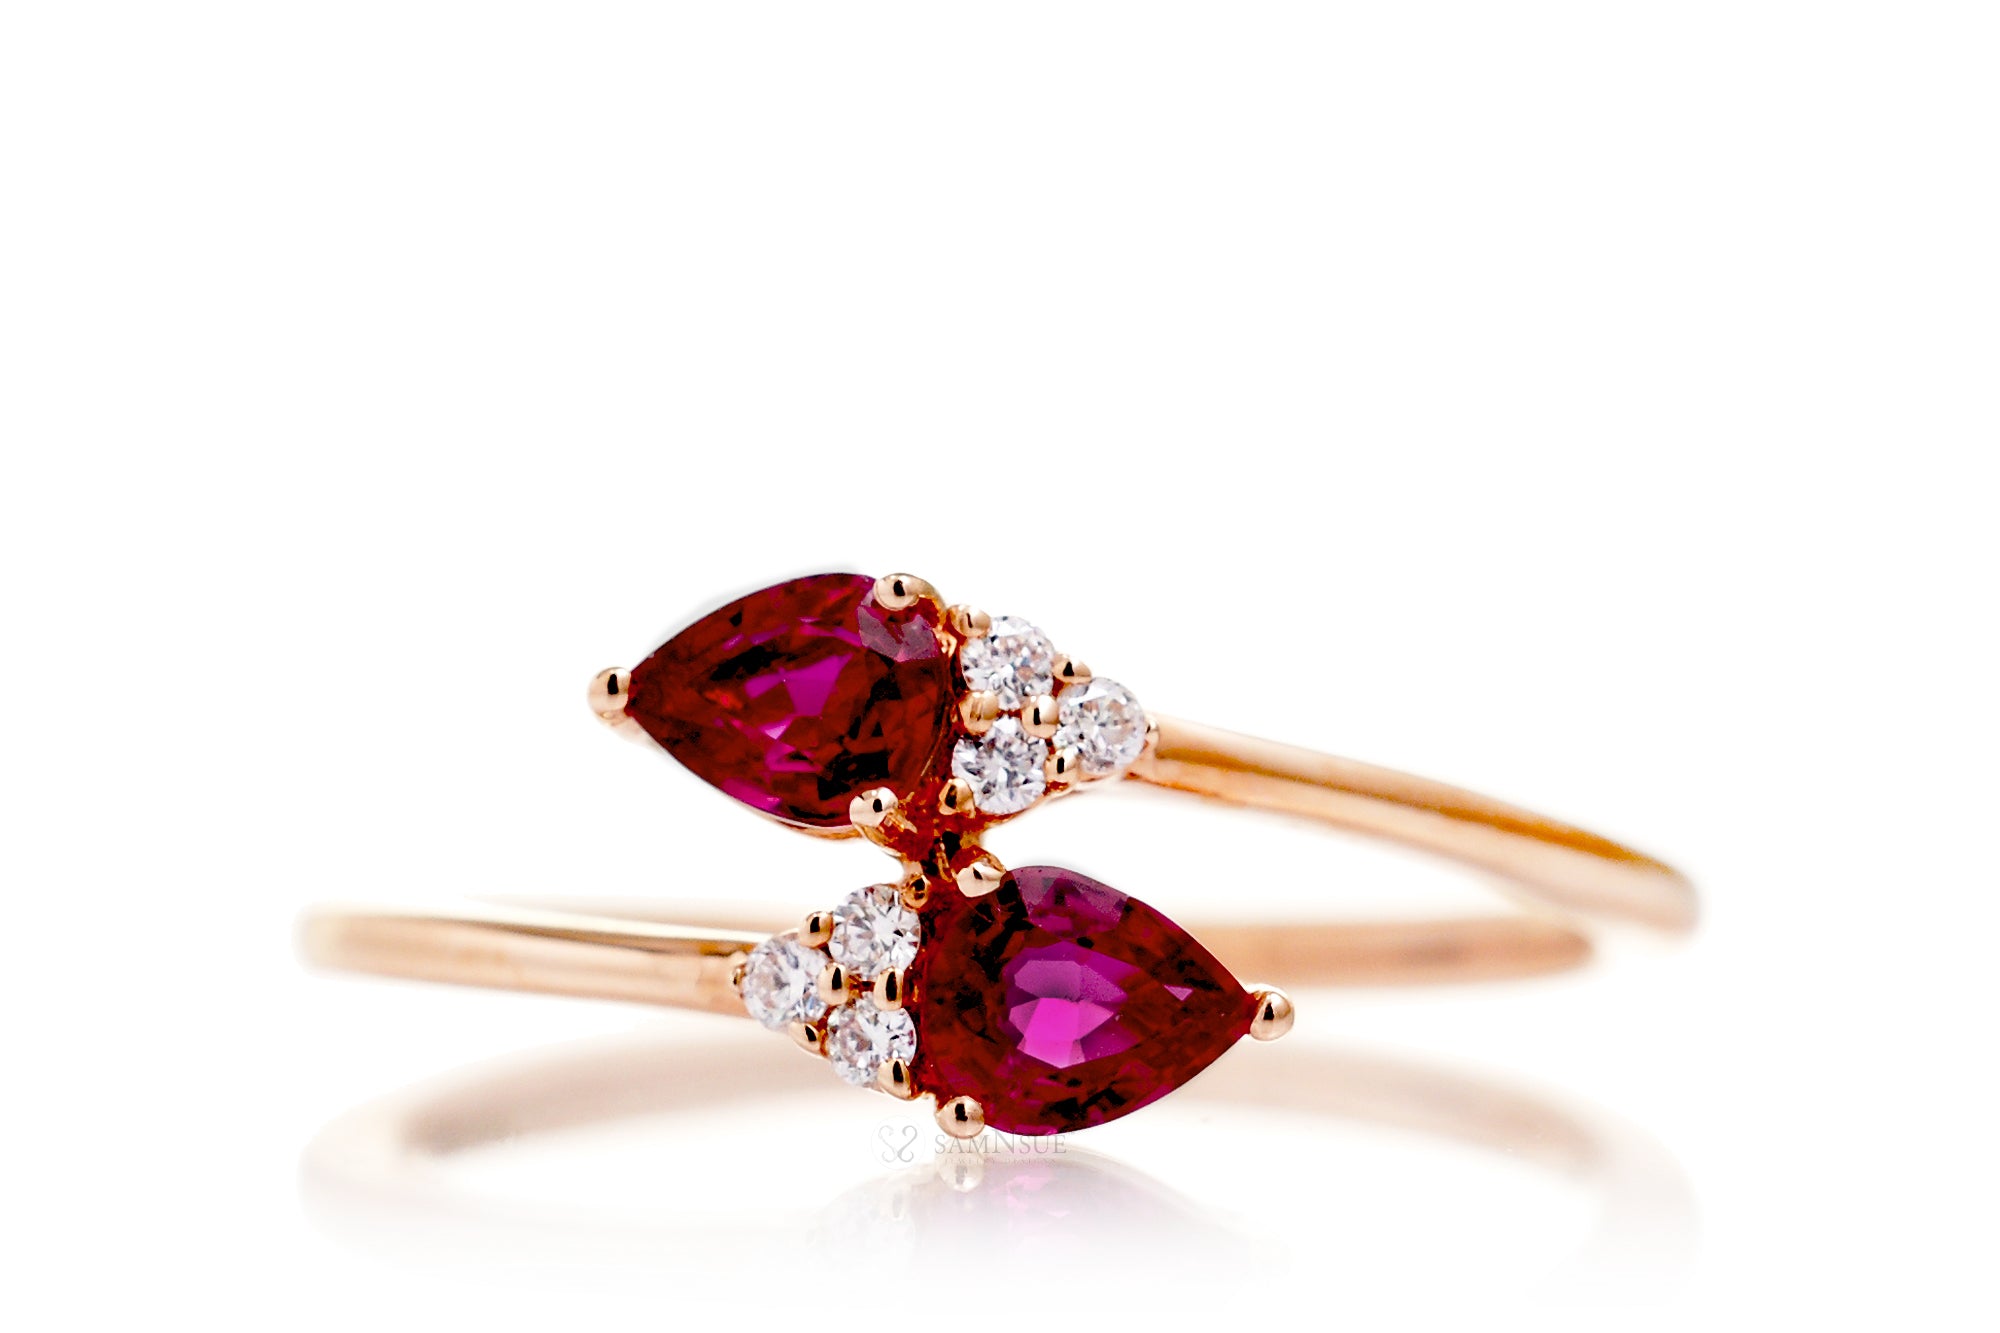 The Bypass Pear Ruby Diamond Promise Ring